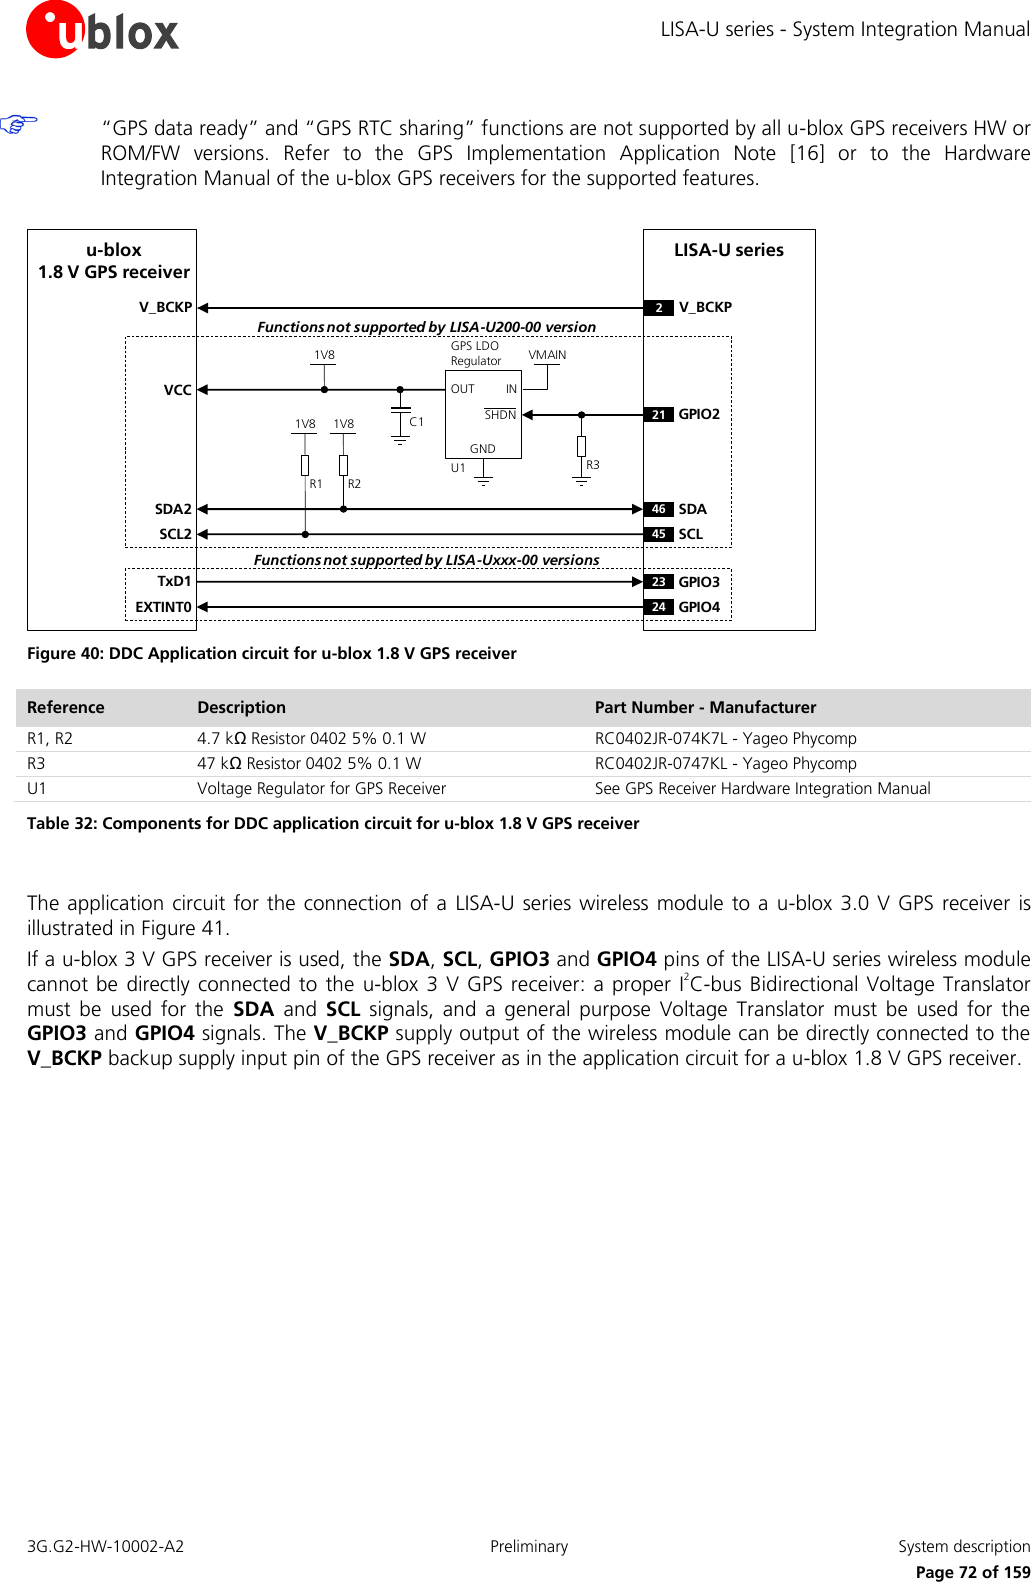 LISA-U series - System Integration Manual 3G.G2-HW-10002-A2  Preliminary  System description      Page 72 of 159  “GPS data ready” and “GPS RTC sharing” functions are not supported by all u-blox GPS receivers HW or ROM/FW  versions.  Refer  to  the  GPS  Implementation  Application  Note  [16]  or  to  the  Hardware Integration Manual of the u-blox GPS receivers for the supported features.  Functions not supported by LISA-Uxxx-00 versionsLISA-U seriesR1INOUTGNDGPS LDORegulatorSHDNu-blox1.8 V GPS receiverSDA2SCL2R21V8 1V8VMAIN1V8U121 GPIO2SDASCLC1TxD1EXTINT0GPIO3GPIO446452324VCCR3V_BCKP V_BCKP2Functions not supported by LISA-U200-00 version Figure 40: DDC Application circuit for u-blox 1.8 V GPS receiver Reference Description Part Number - Manufacturer R1, R2  4.7 kΩ Resistor 0402 5% 0.1 W  RC0402JR-074K7L - Yageo Phycomp R3 47 kΩ Resistor 0402 5% 0.1 W  RC0402JR-0747KL - Yageo Phycomp U1 Voltage Regulator for GPS Receiver See GPS Receiver Hardware Integration Manual Table 32: Components for DDC application circuit for u-blox 1.8 V GPS receiver  The application circuit  for the connection of  a  LISA-U series  wireless module to a  u-blox 3.0 V GPS  receiver is illustrated in Figure 41. If a u-blox 3 V GPS receiver is used, the SDA, SCL, GPIO3 and GPIO4 pins of the LISA-U series wireless module cannot be  directly connected  to the  u-blox 3  V GPS receiver: a proper  I2C-bus Bidirectional Voltage Translator must  be  used  for  the  SDA  and  SCL  signals,  and  a  general  purpose  Voltage  Translator  must  be  used  for  the GPIO3 and GPIO4 signals. The V_BCKP supply output of the wireless module can be directly connected to the V_BCKP backup supply input pin of the GPS receiver as in the application circuit for a u-blox 1.8 V GPS receiver.  